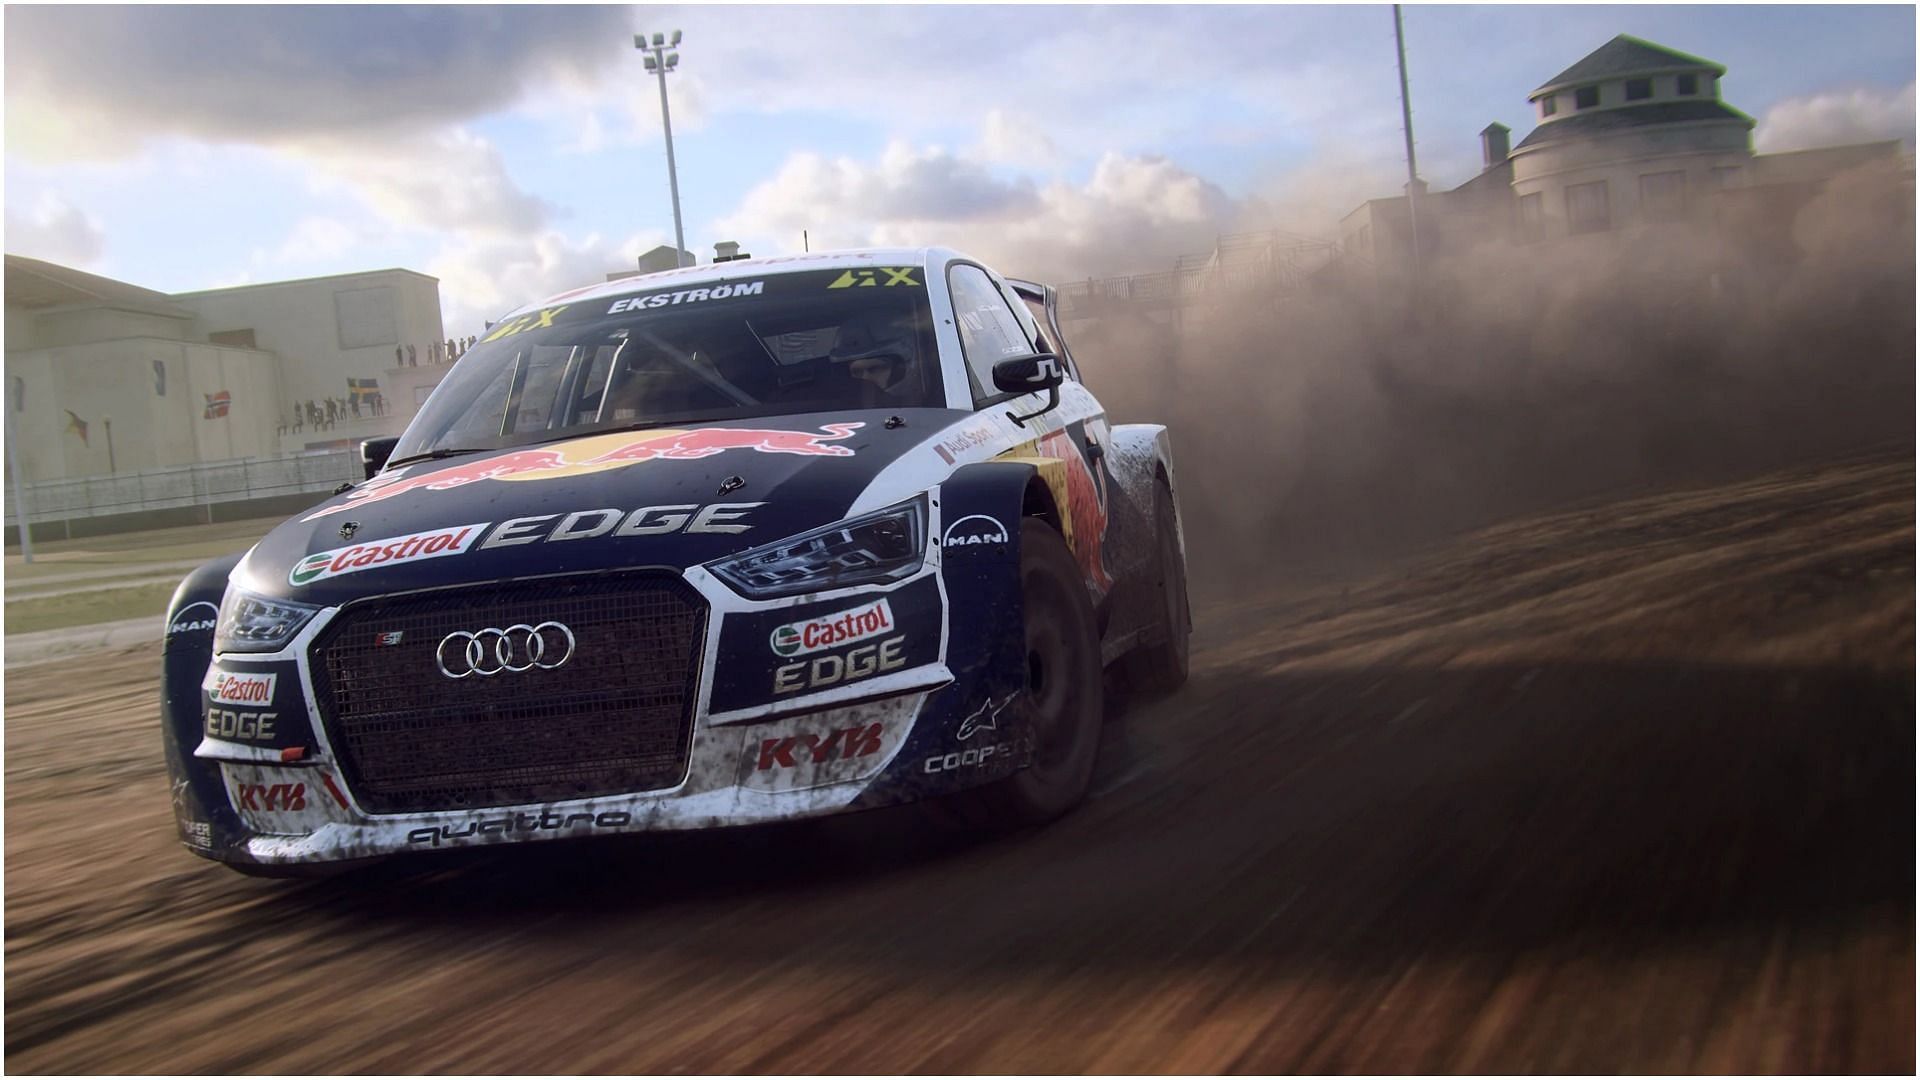 An Audi drifts in Dirt Rally 2.0 (image via Codemasters)